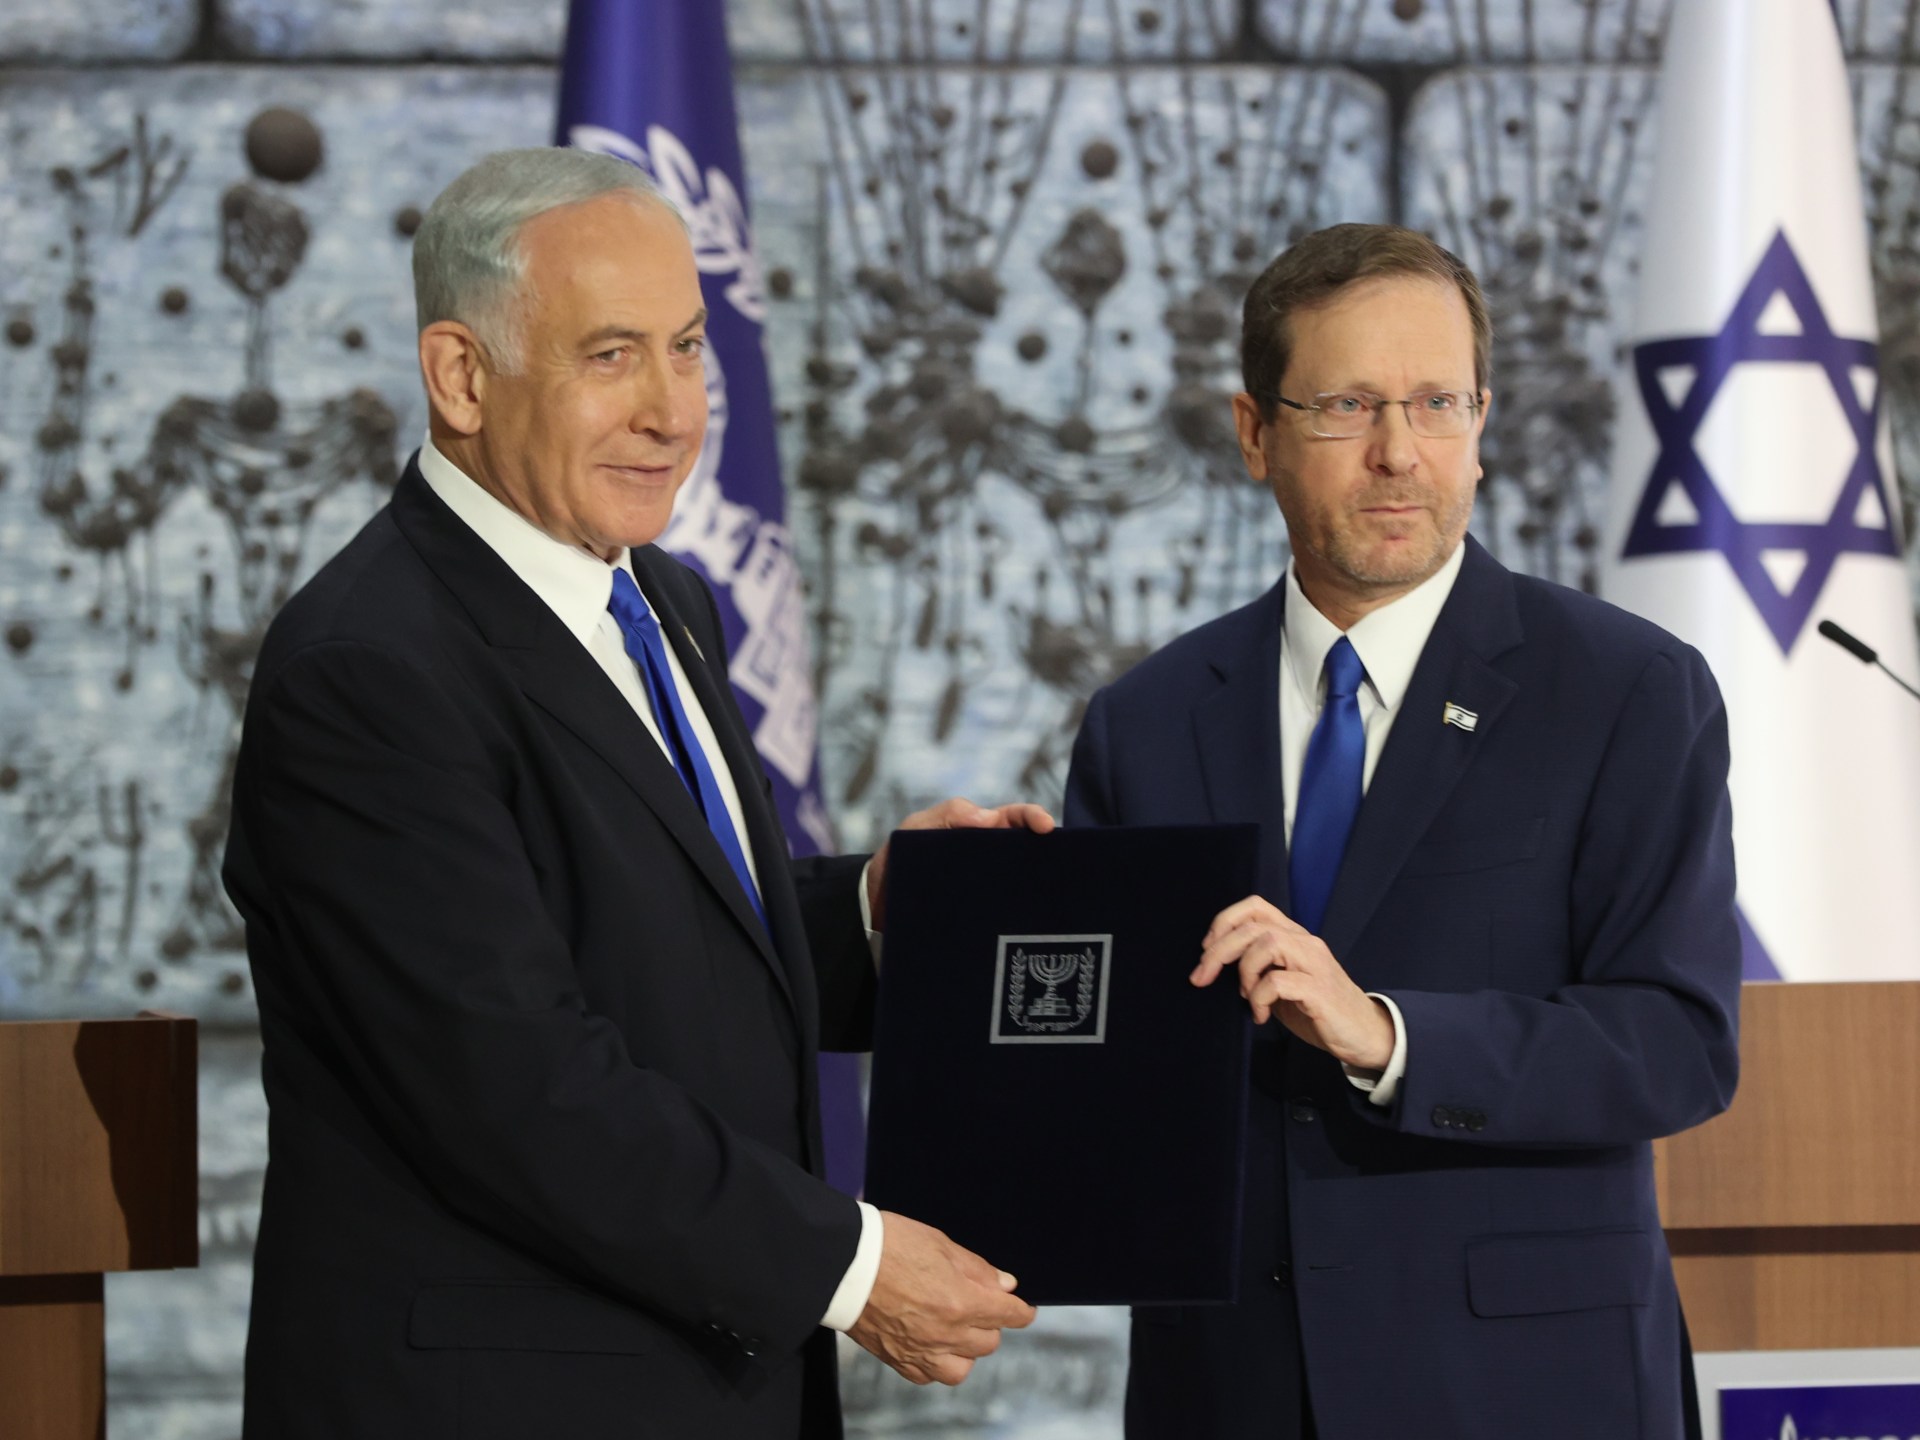 Netanyahu formally tasked with forming Israel’s new authorities